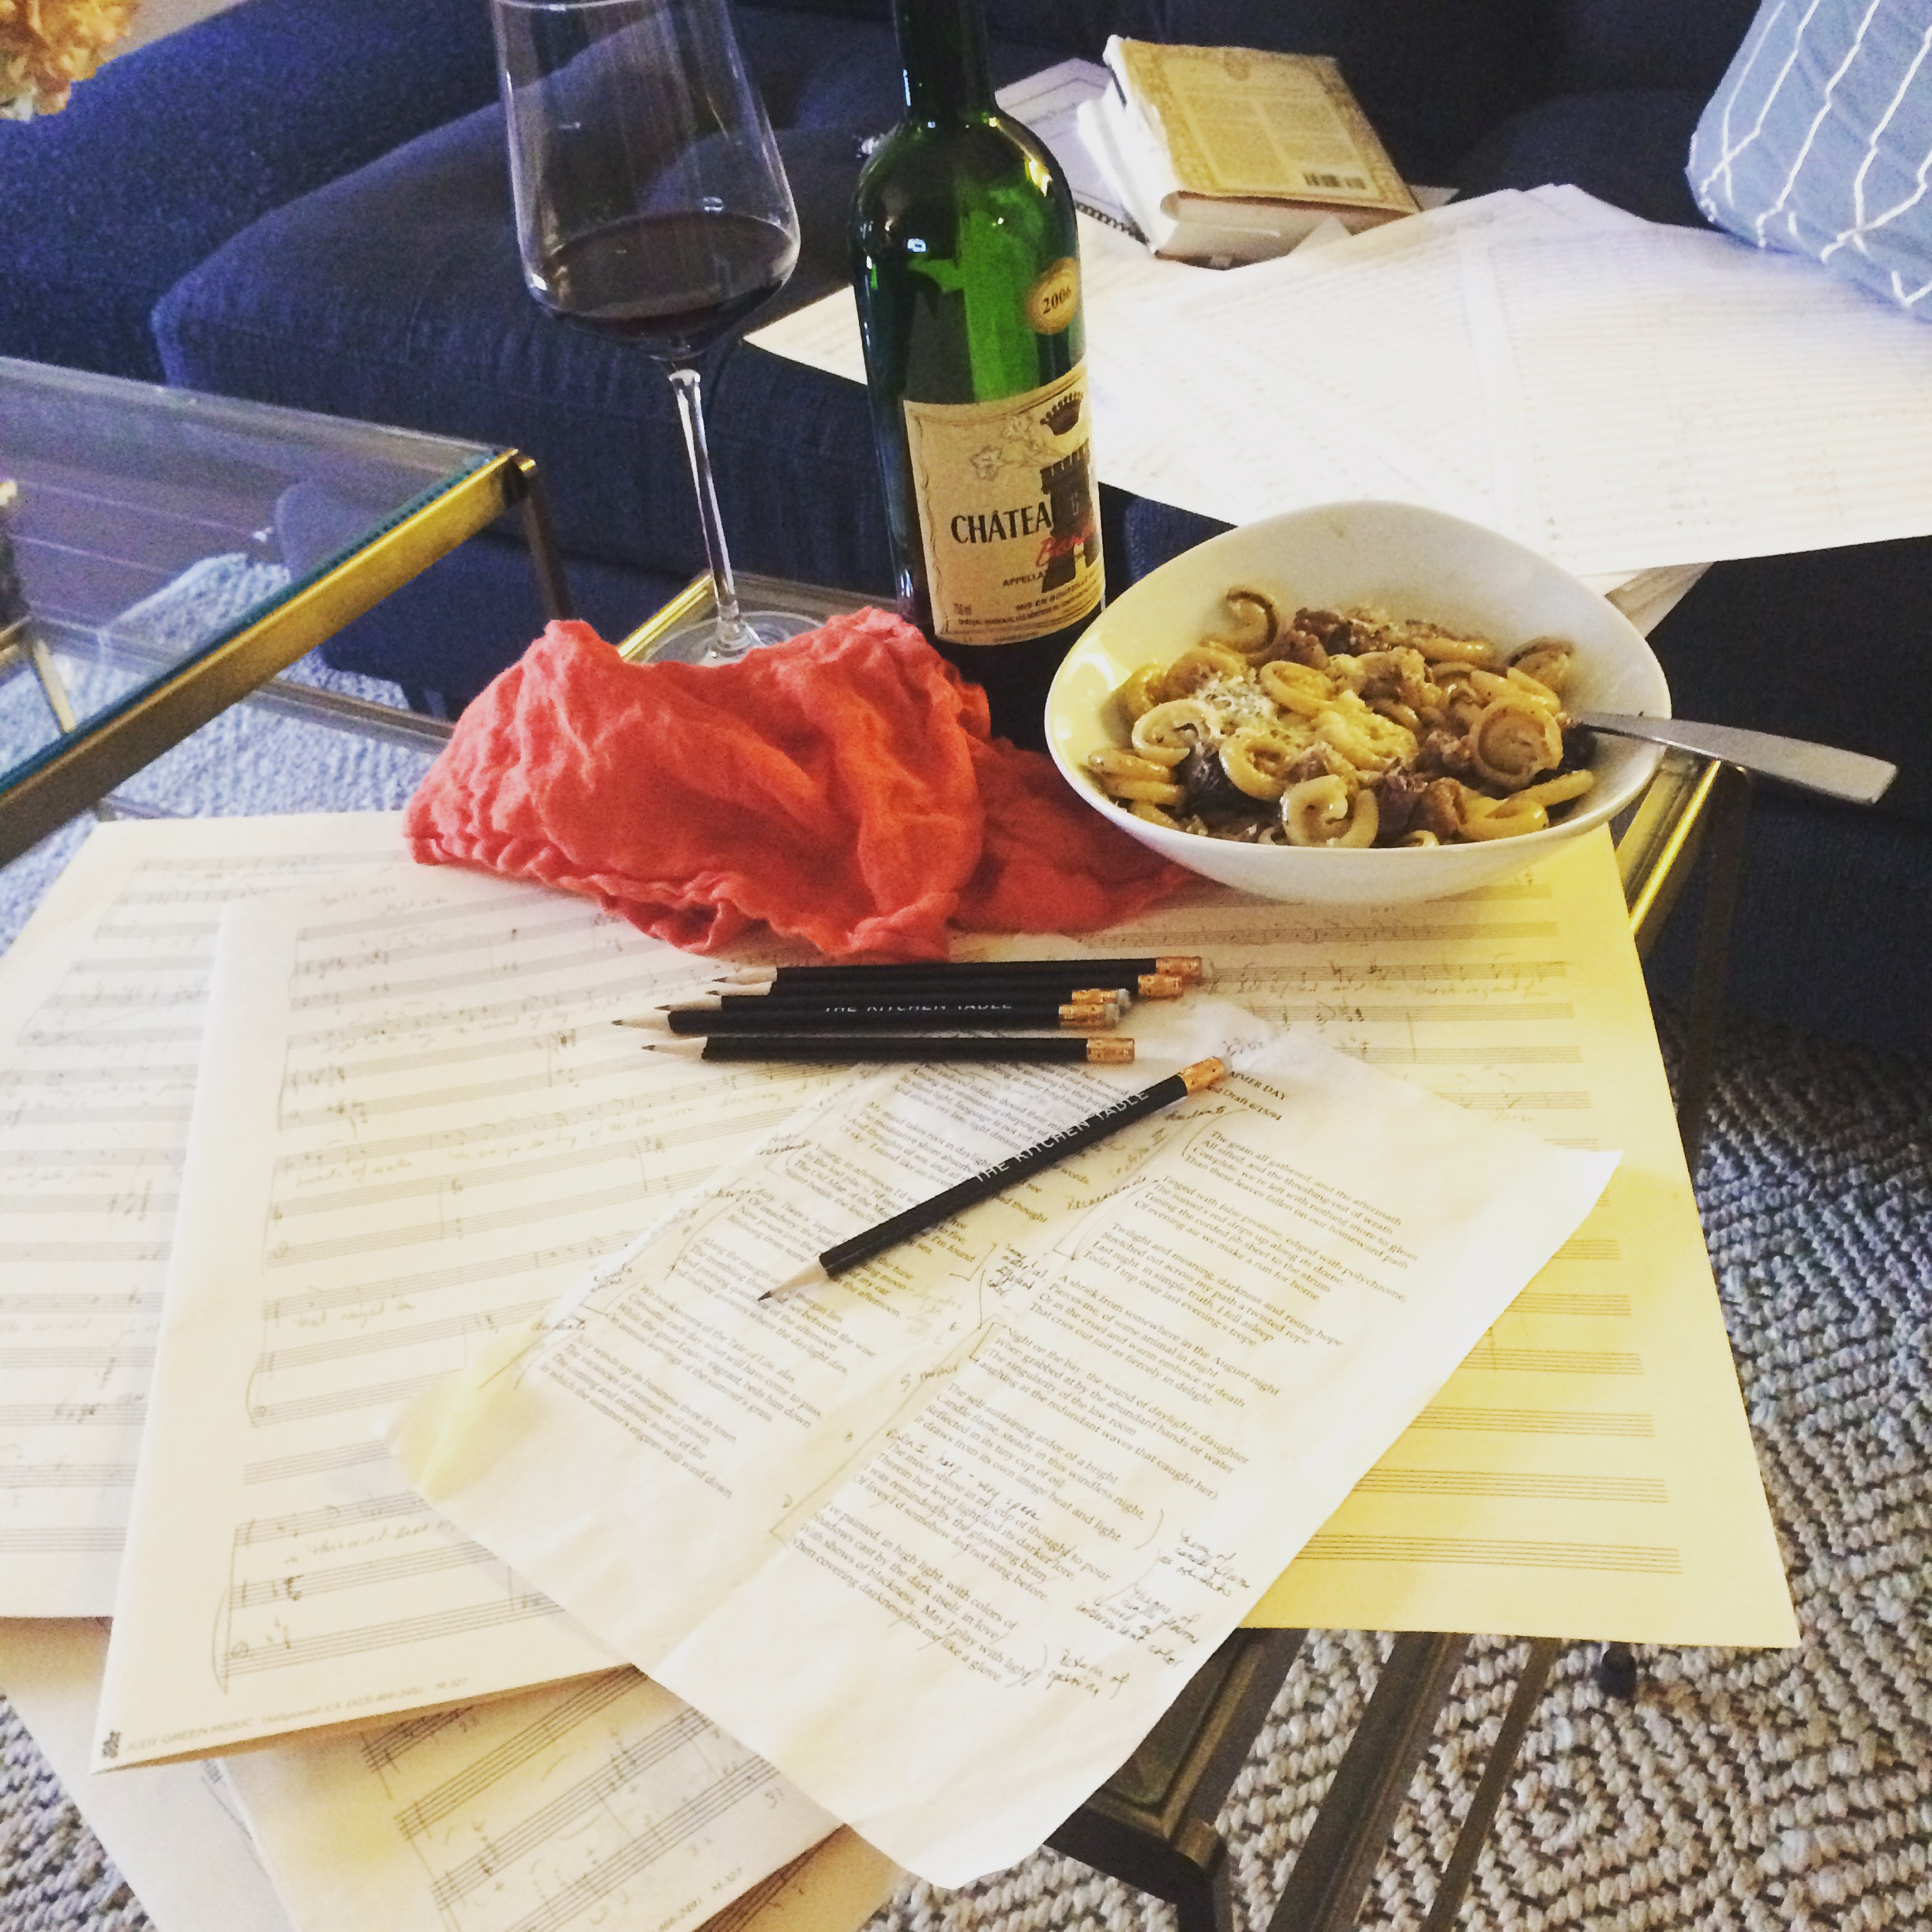 A table with pages of score manuscript paper, pens, a glass of red wine, a wine bottle, and a bowl of pasta